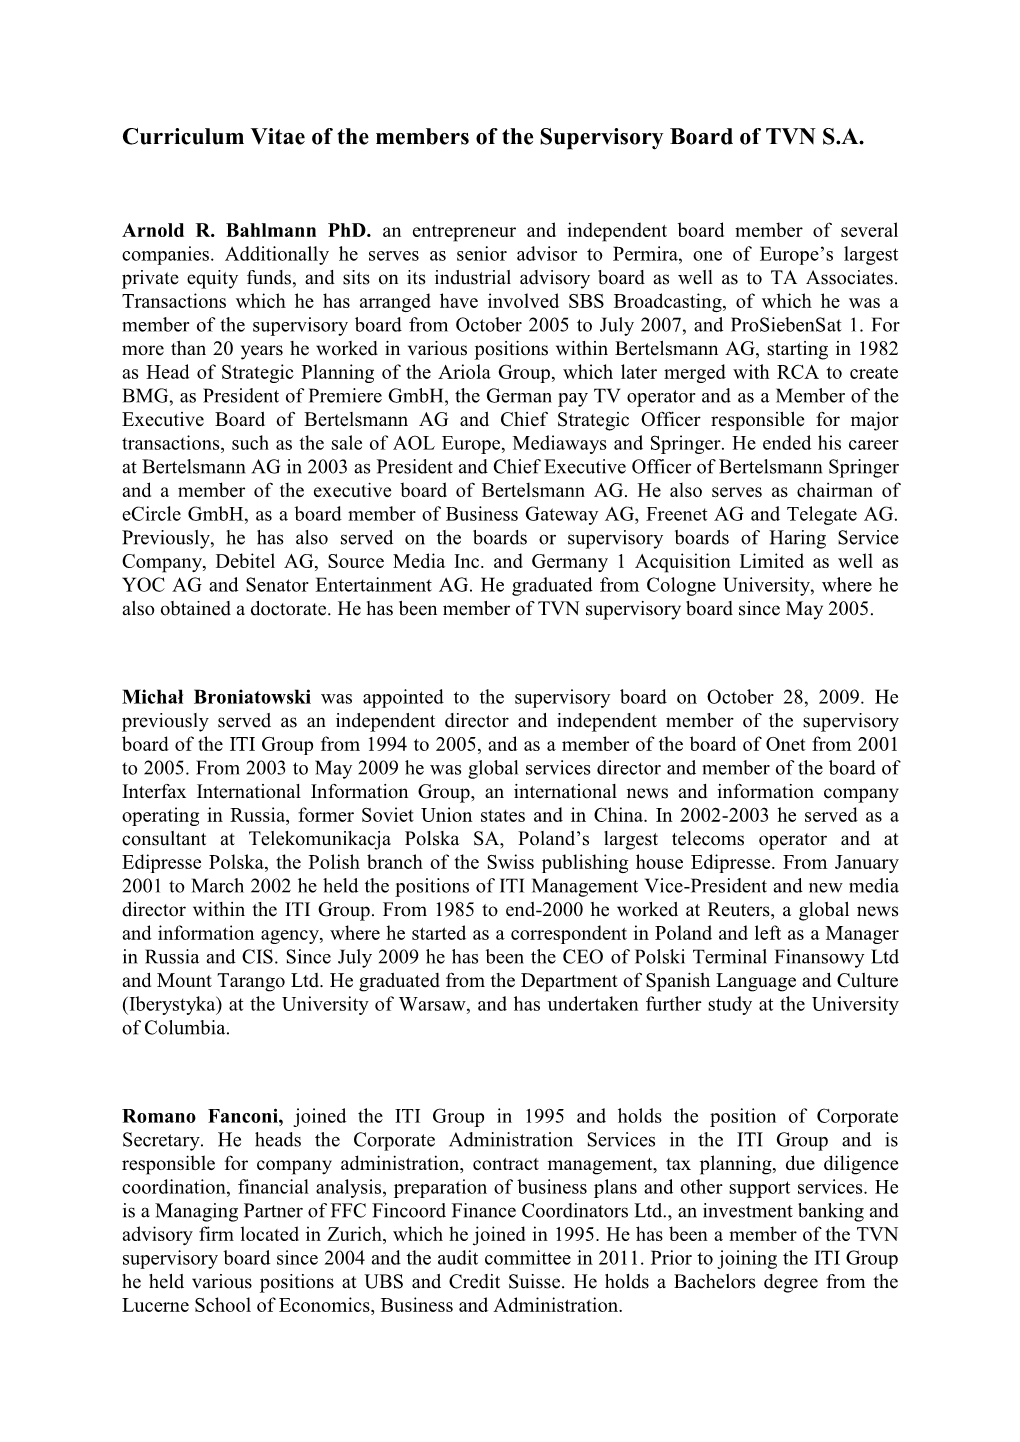 Curriculum Vitae of the Members of the Supervisory Board of TVN S.A